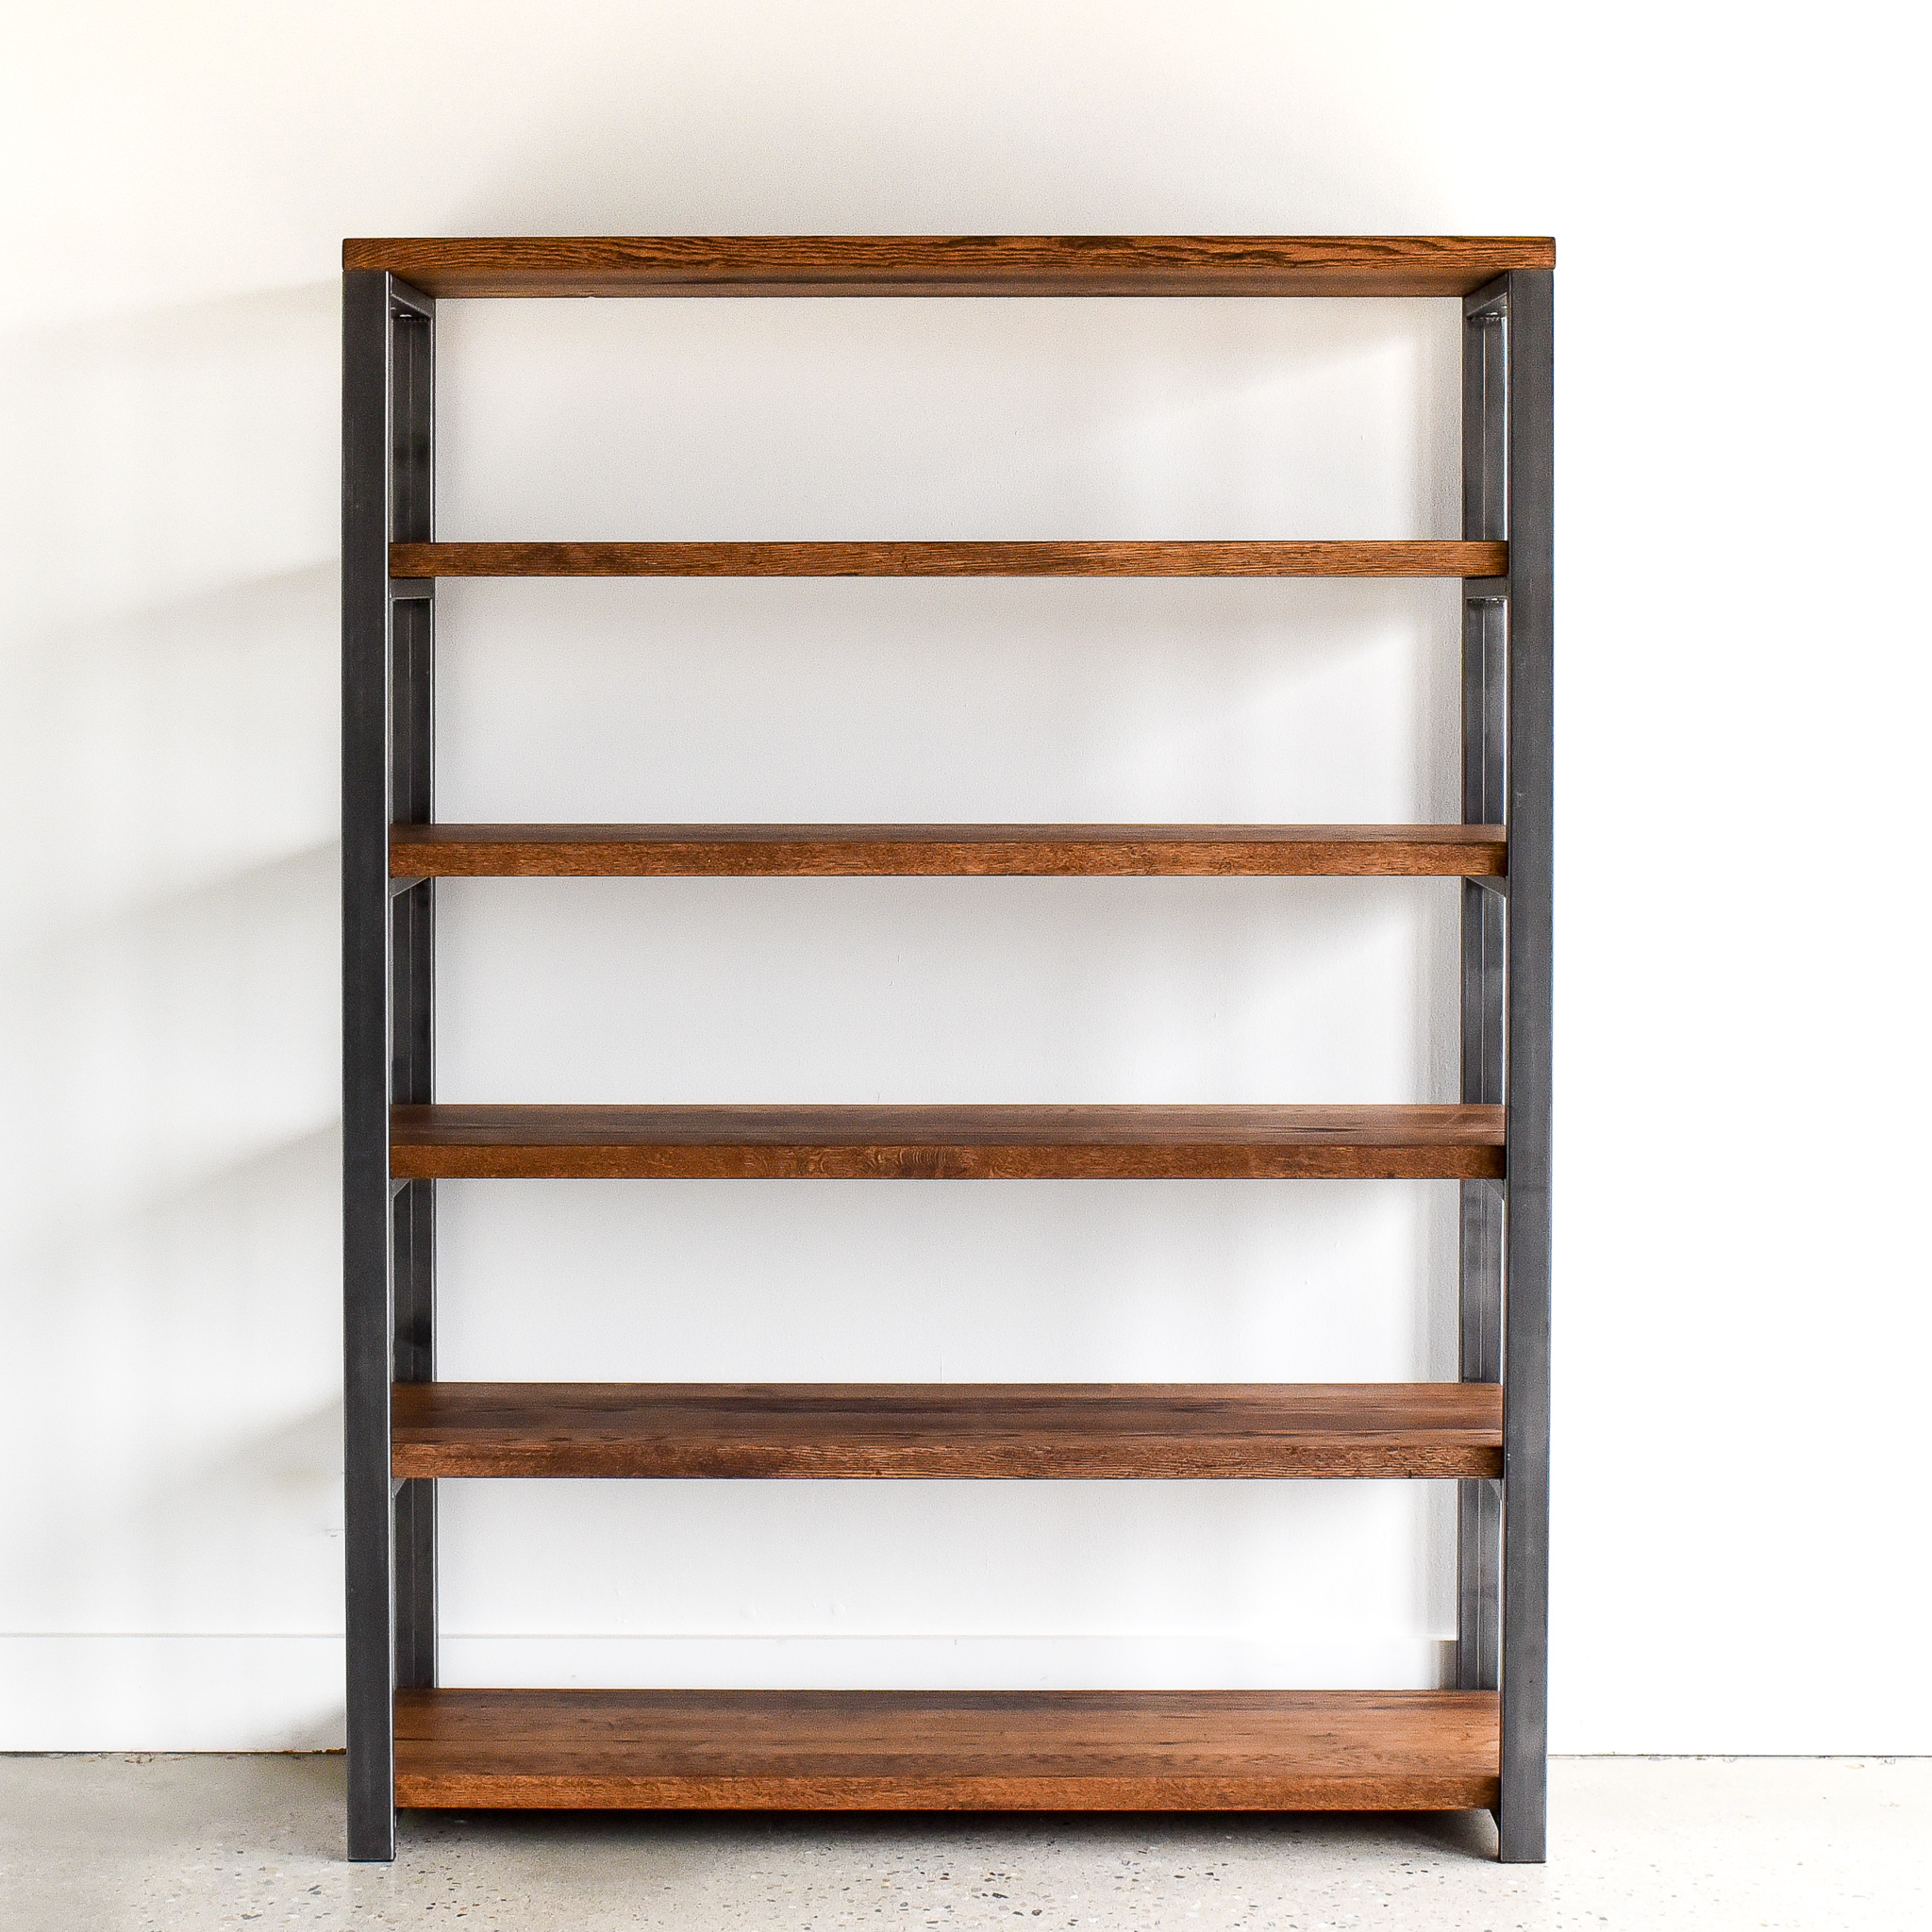 Open Industrial Bookcase With Reclaimed Wood Shelves What We Make